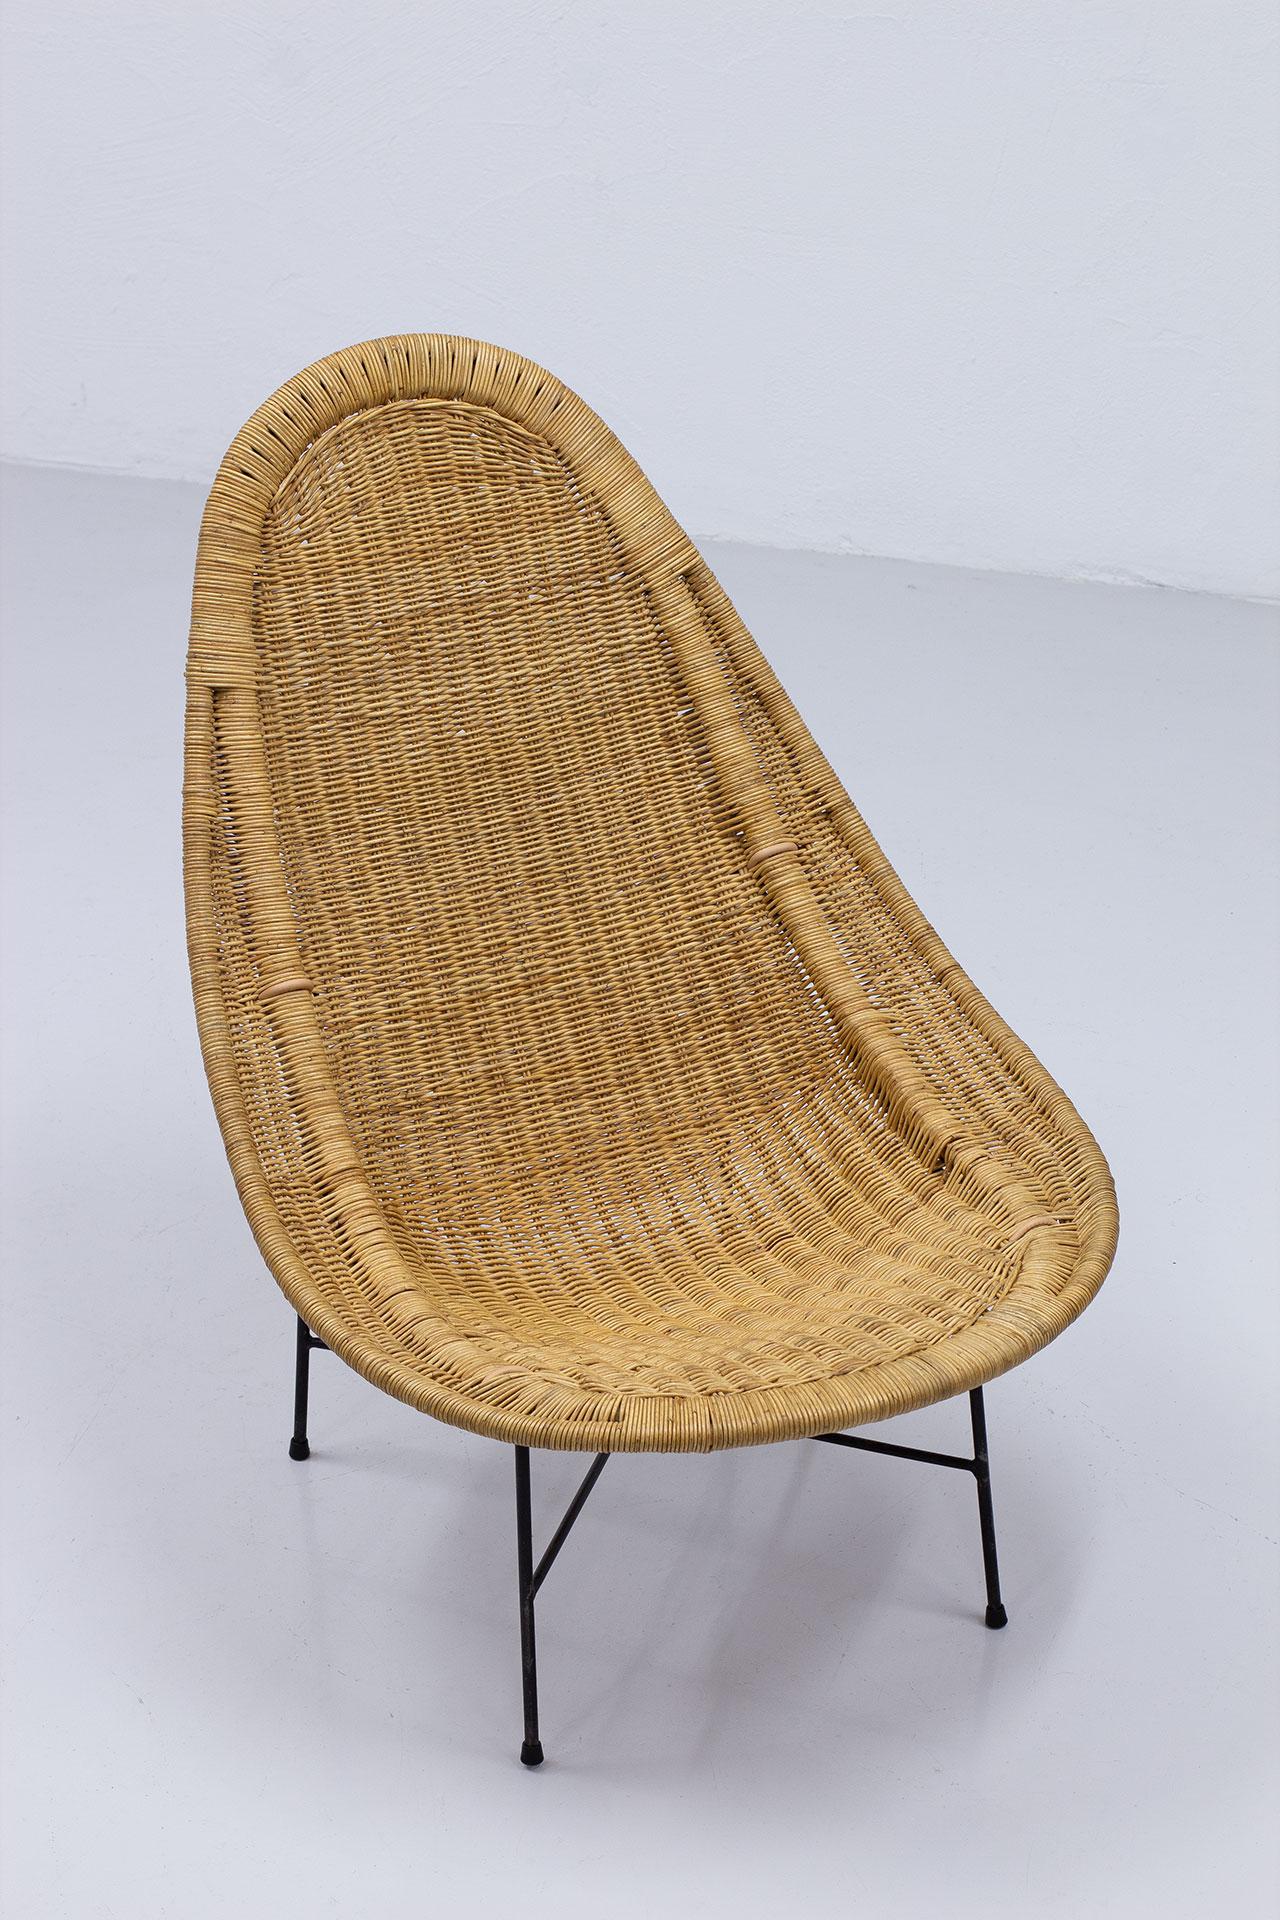 'Stora Kraal' Lounge Chair in Woven Cane by Kerstin Hörlin Holmquist, Sweden In Good Condition For Sale In Stockholm, SE